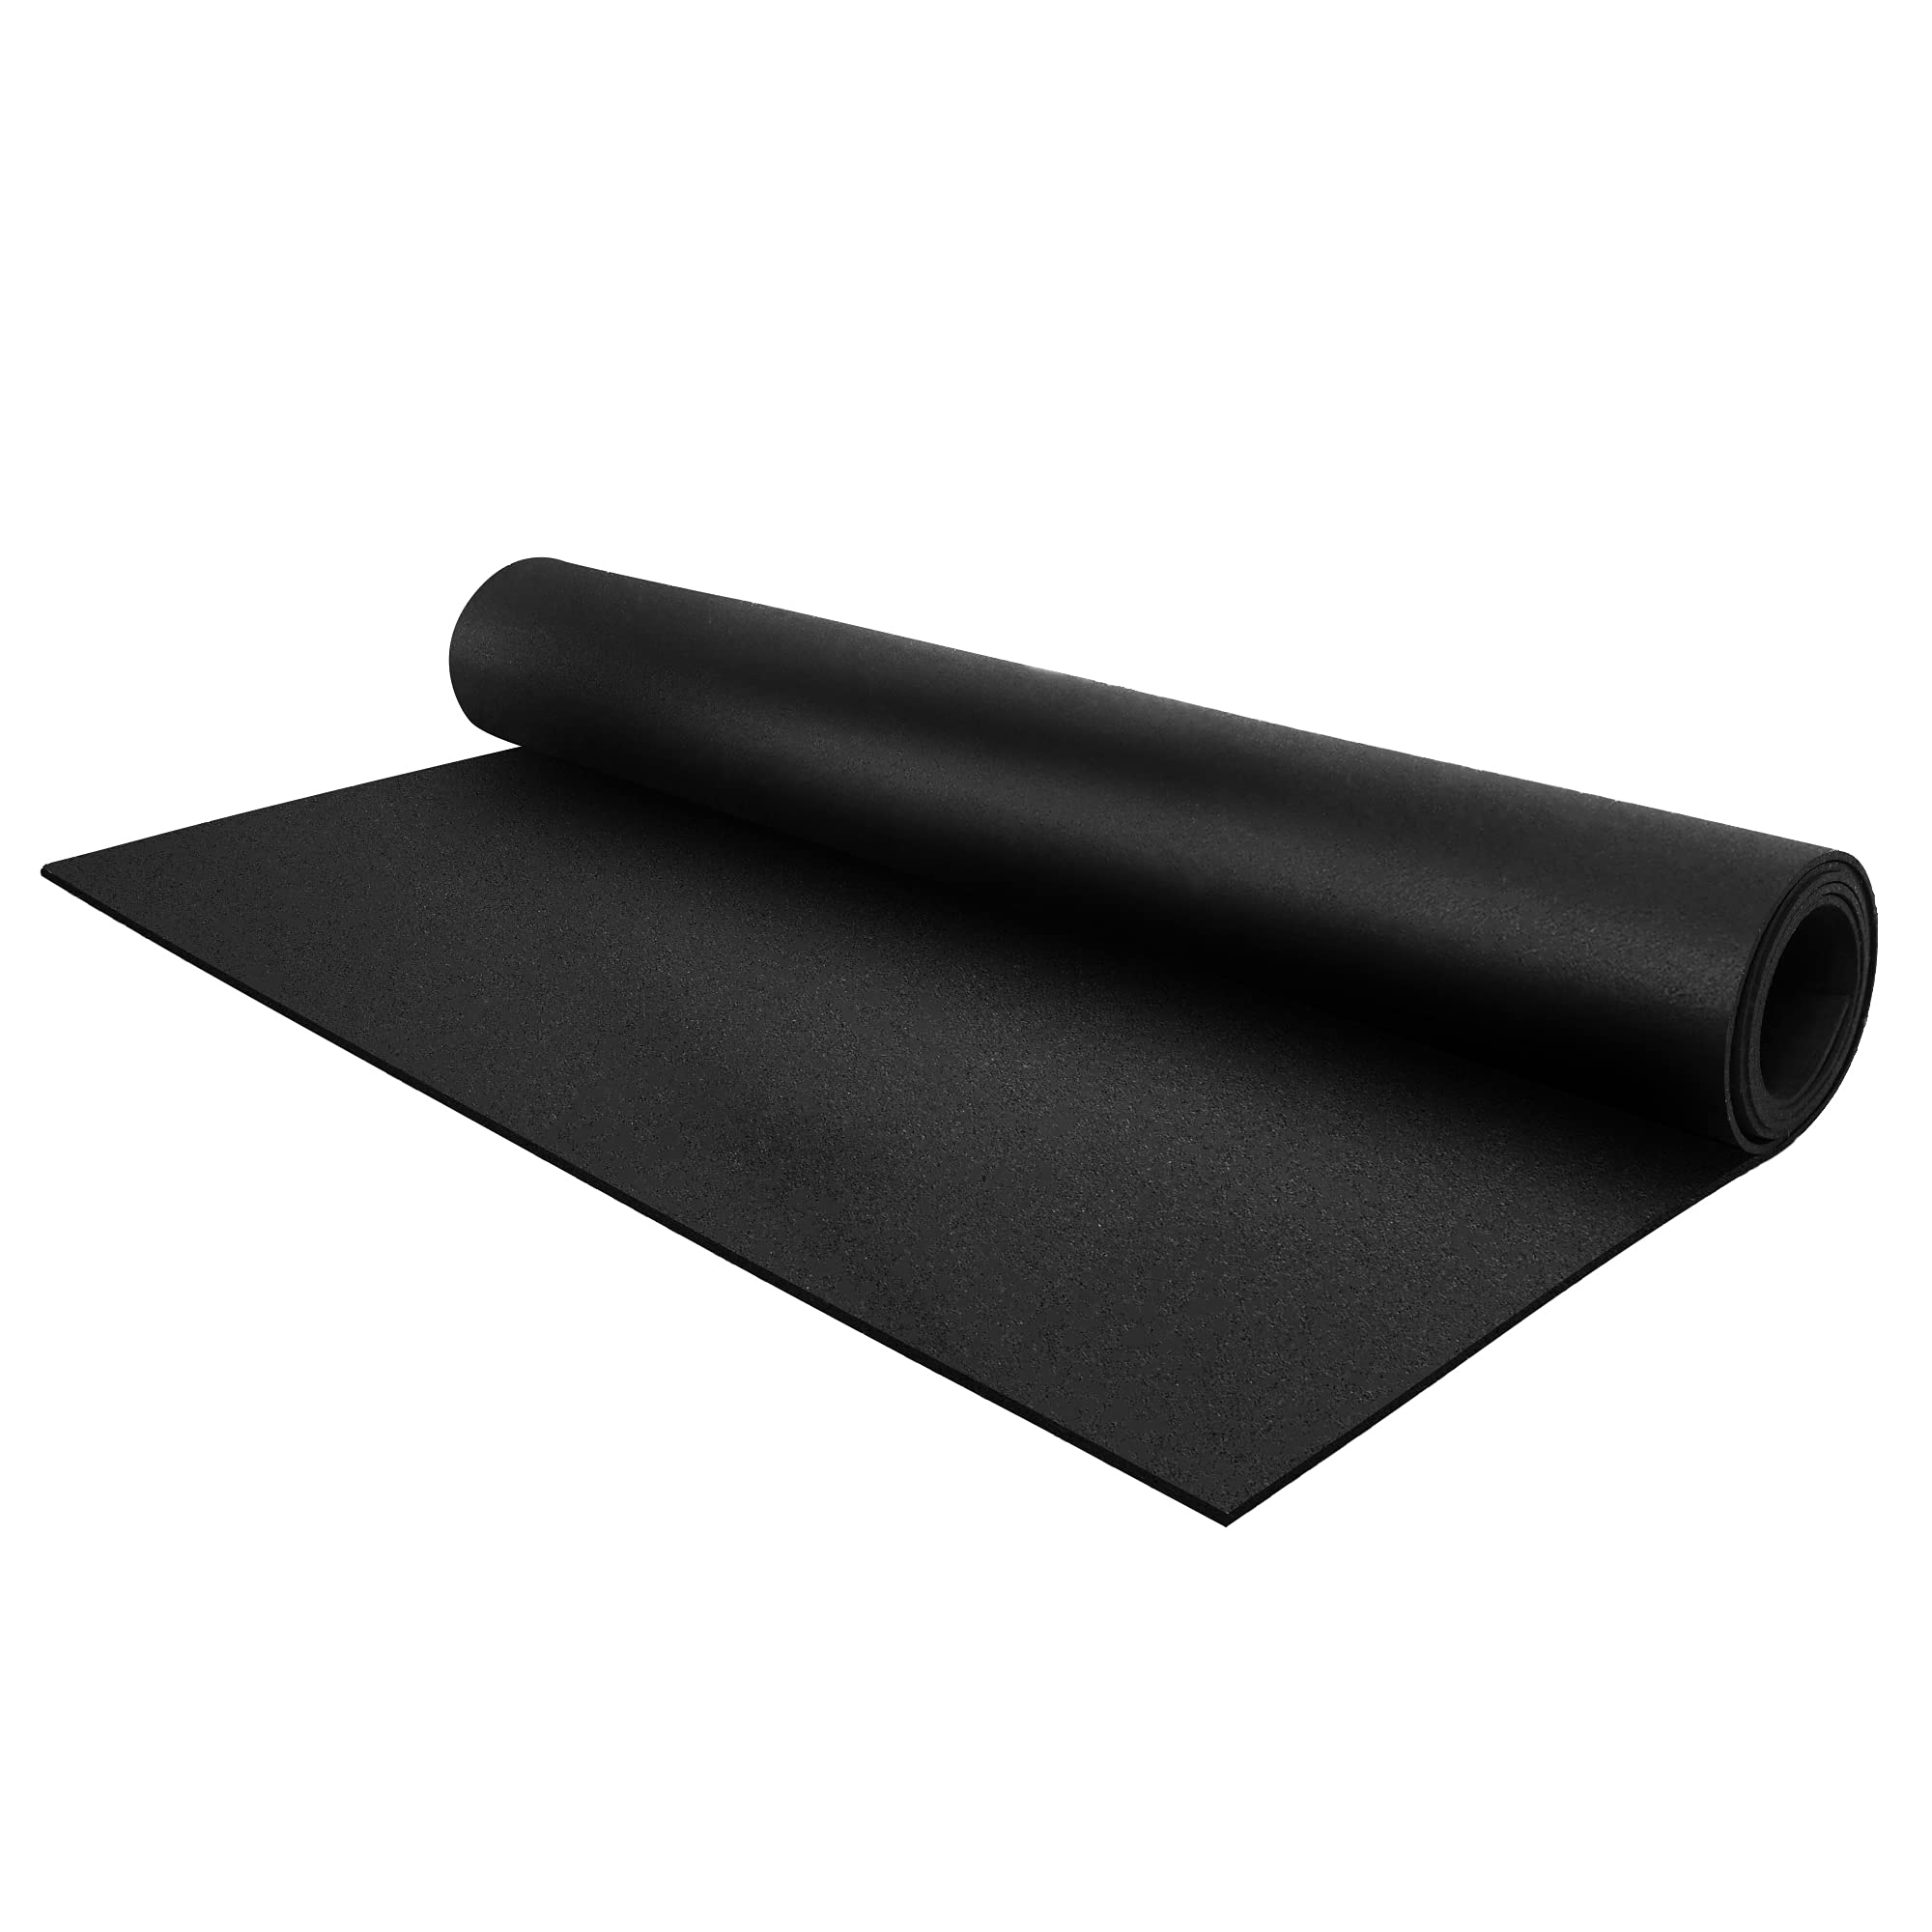 Incstores IncStores 1/4 Thick Tough Rubber Flooring Roll, Flexible  Recycled Rubber Floor Mats for Home Gym